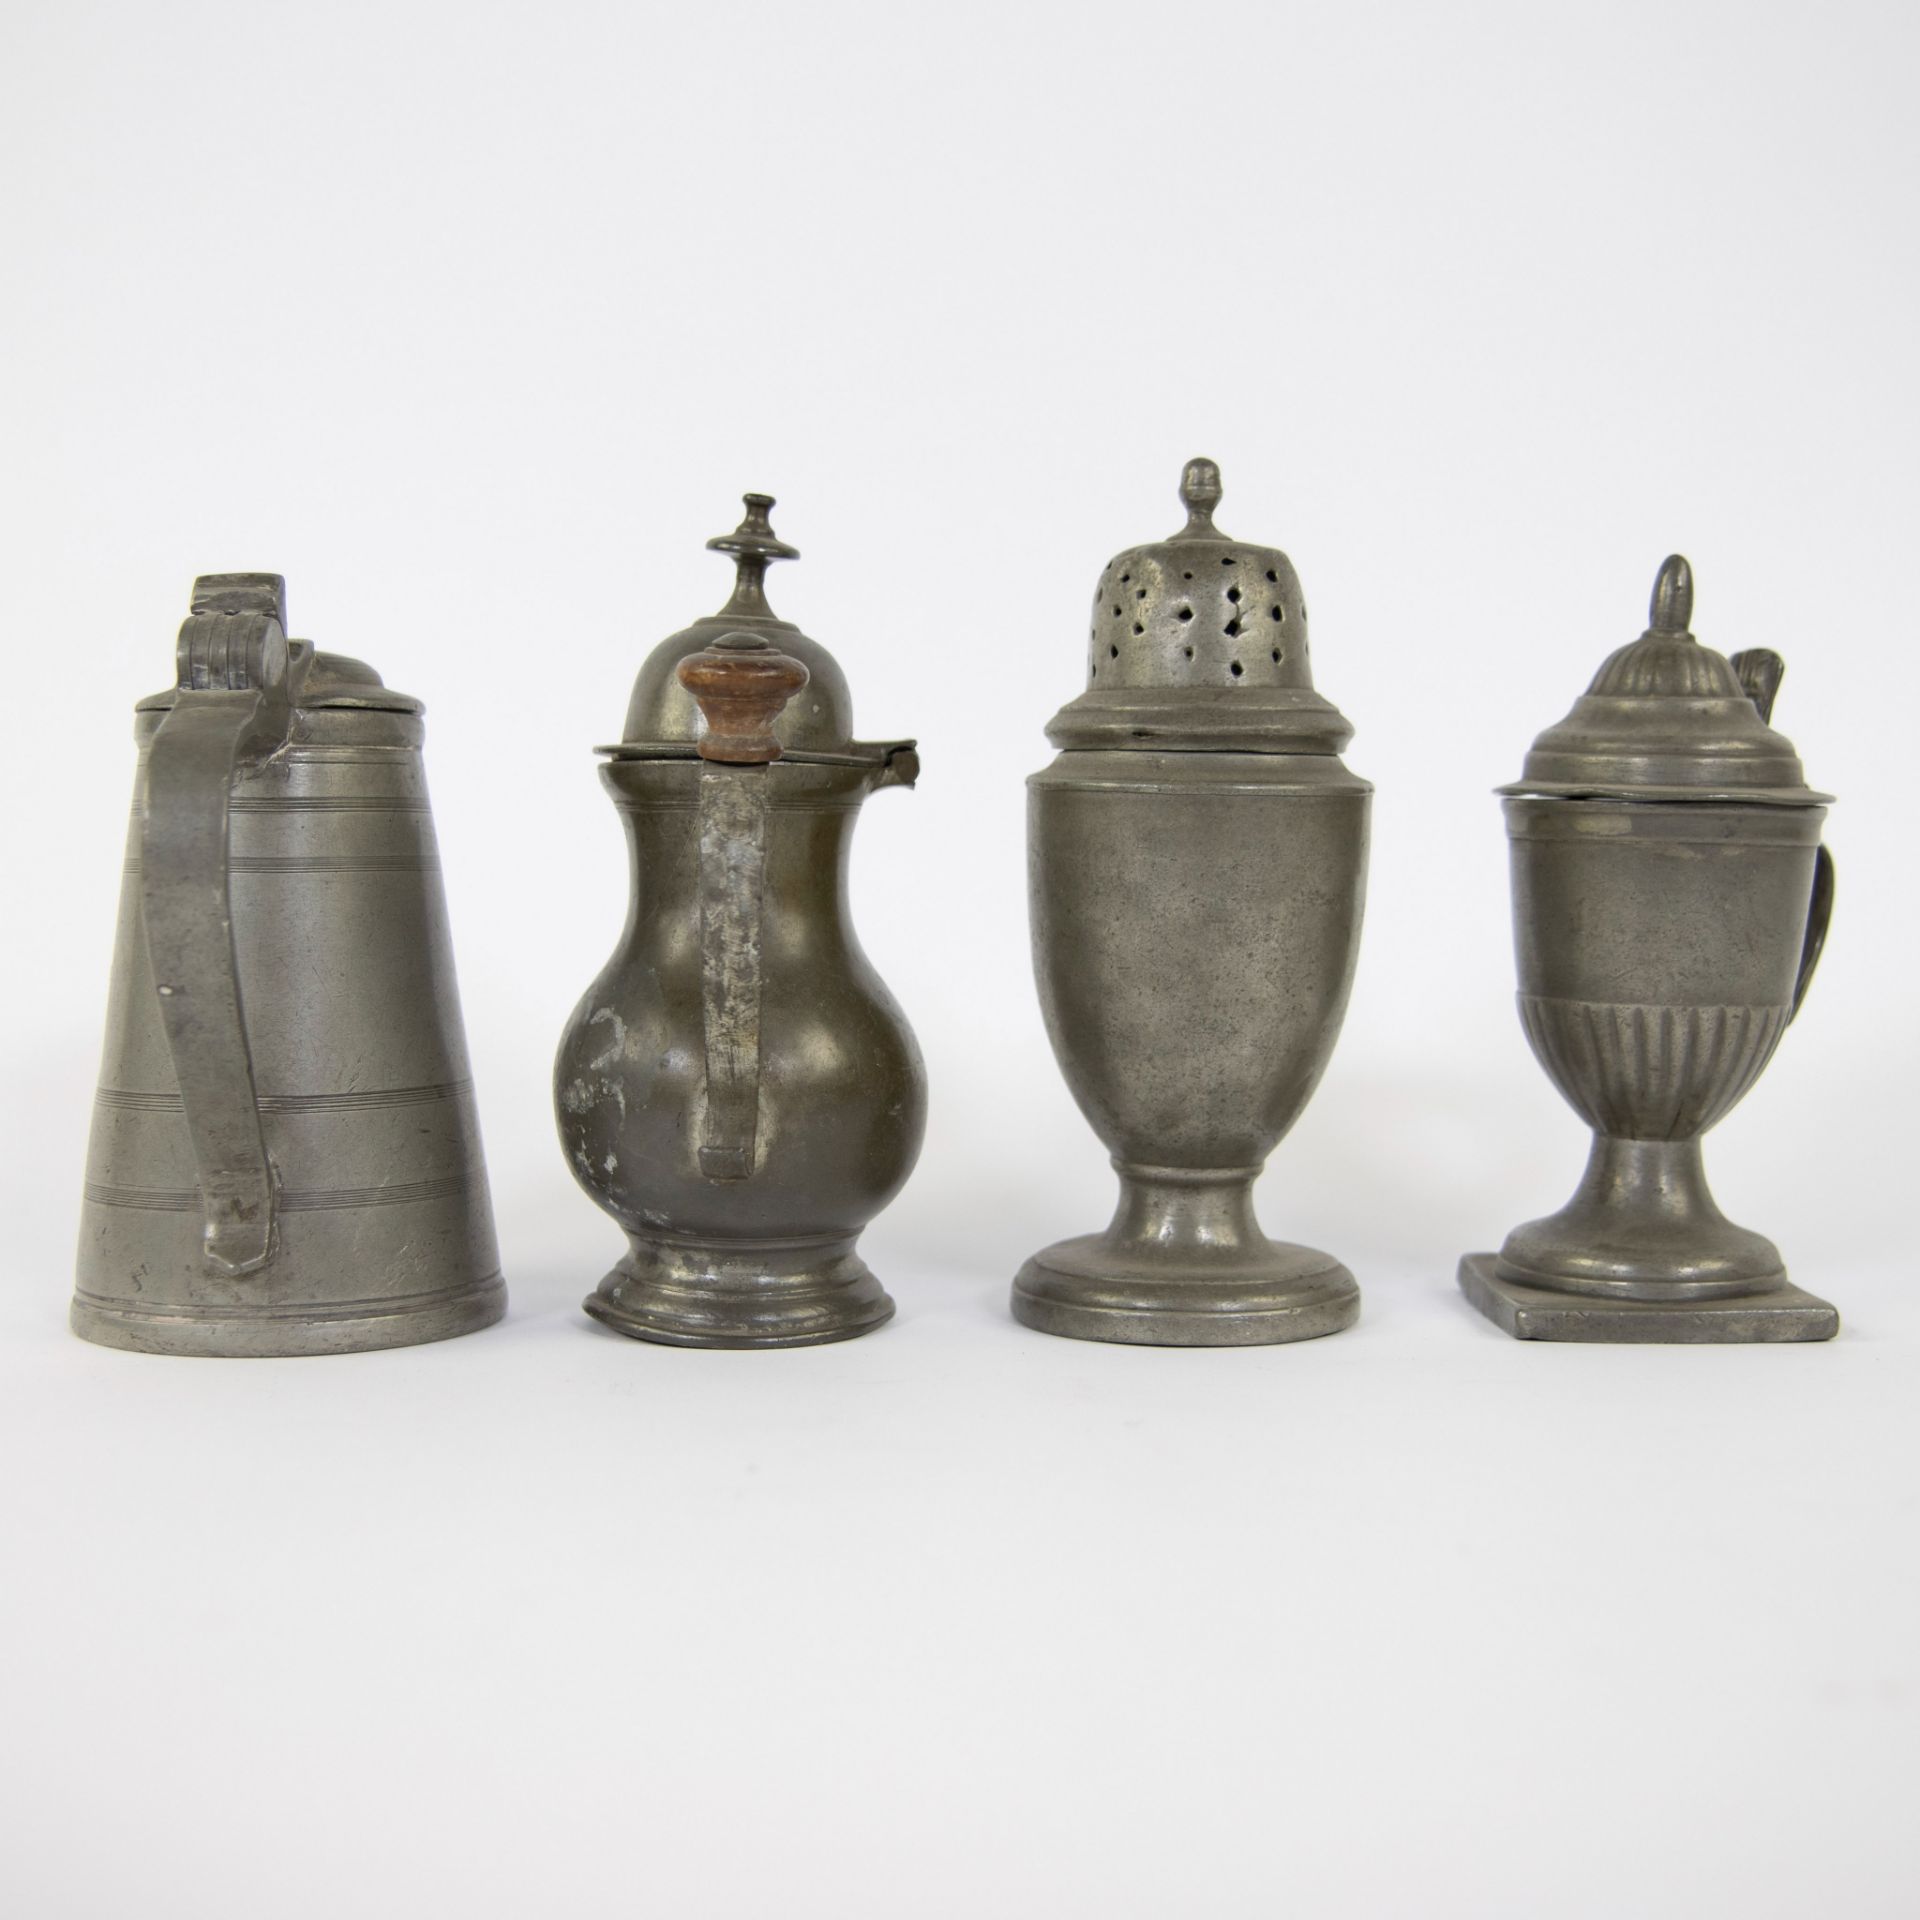 Large collection of pewter pitchers and beer pots, 18th/19th century - Image 10 of 10